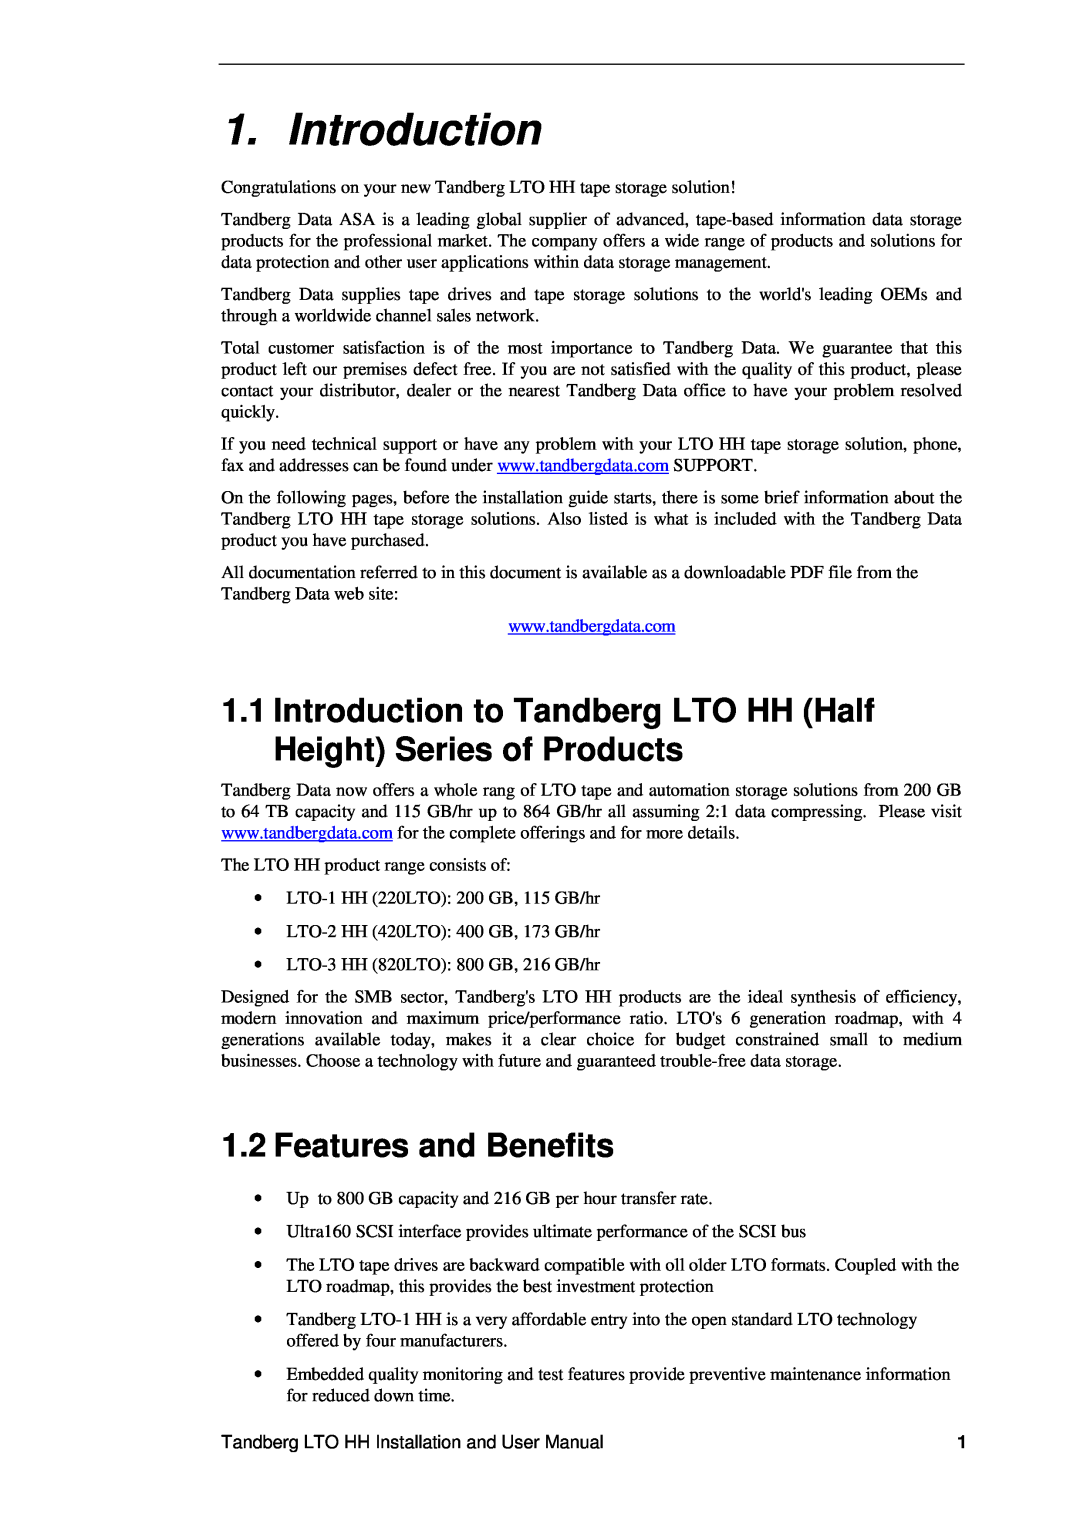 Tandberg Data LTO-1 HH, LTO-3 HH, LTO-2 HH user manual Introduction, Features and Benefits 